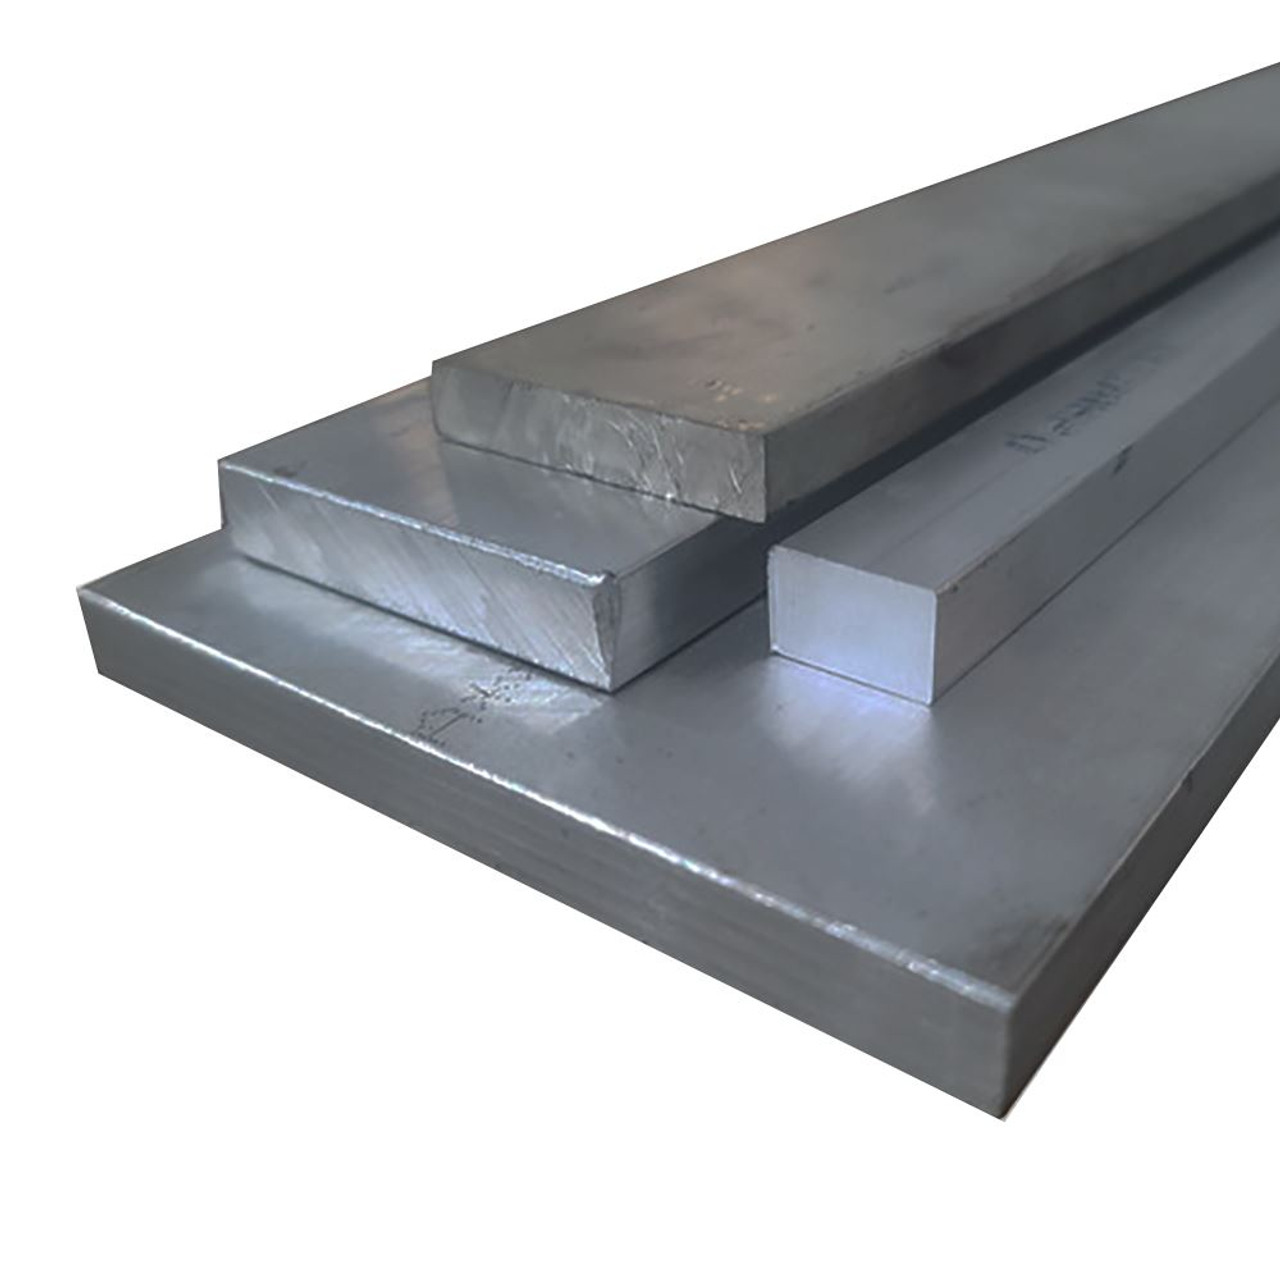 0.188" (3/16 inch) Thickness, 1018 Steel Flat Bar, Cold Finished